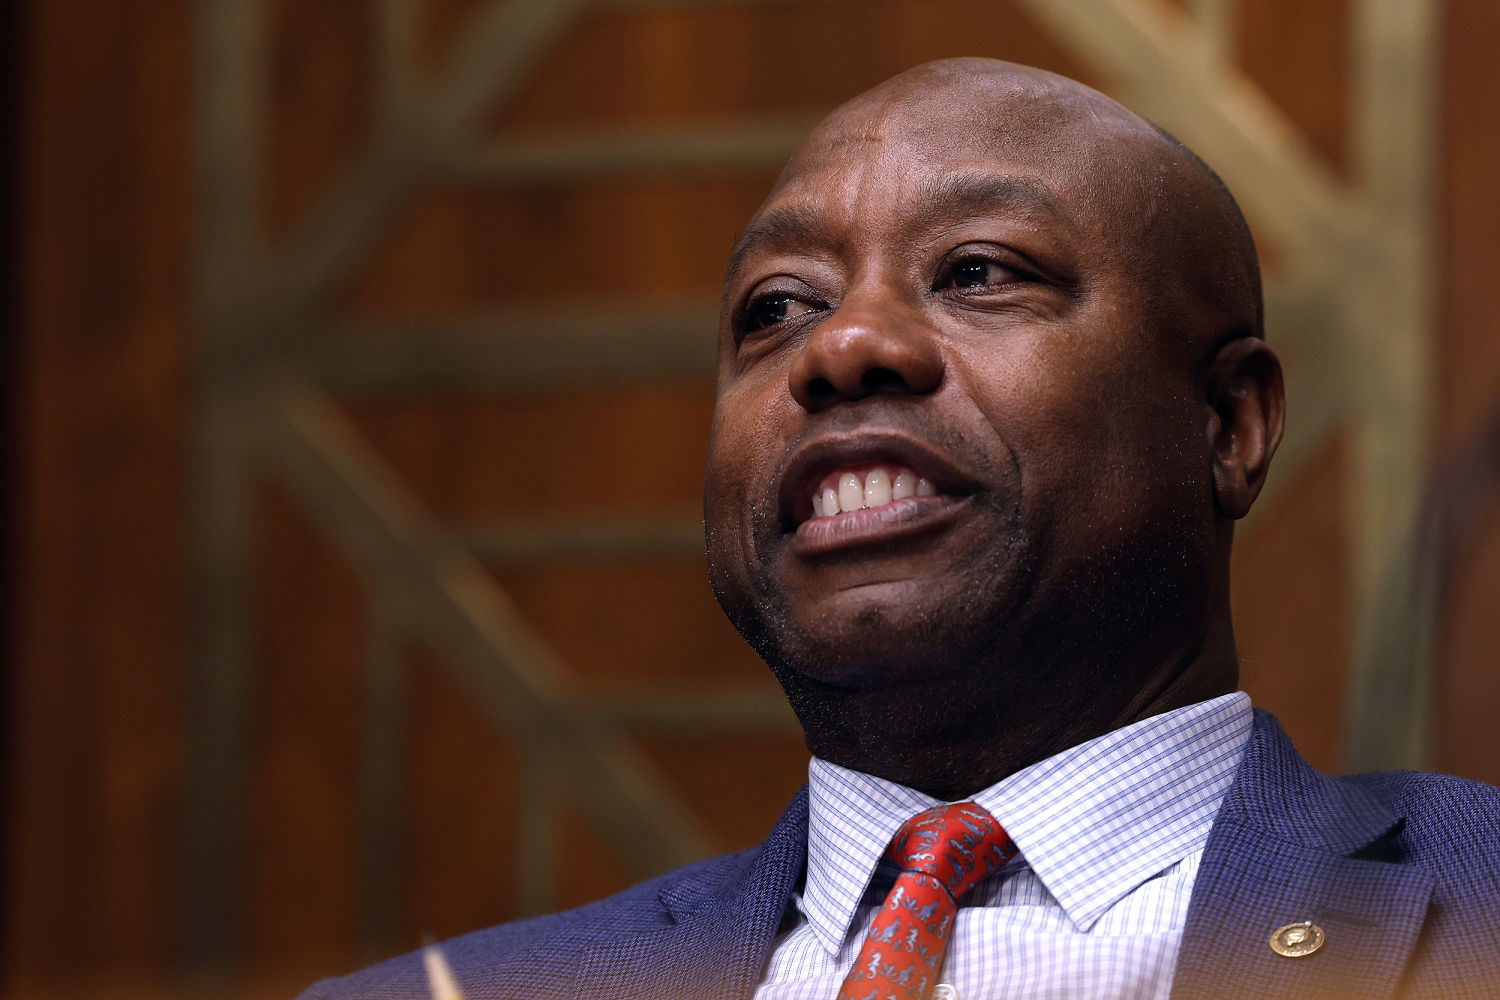 Pay attention to Tim Scott’s slippery signaling on the legitimacy of the election system